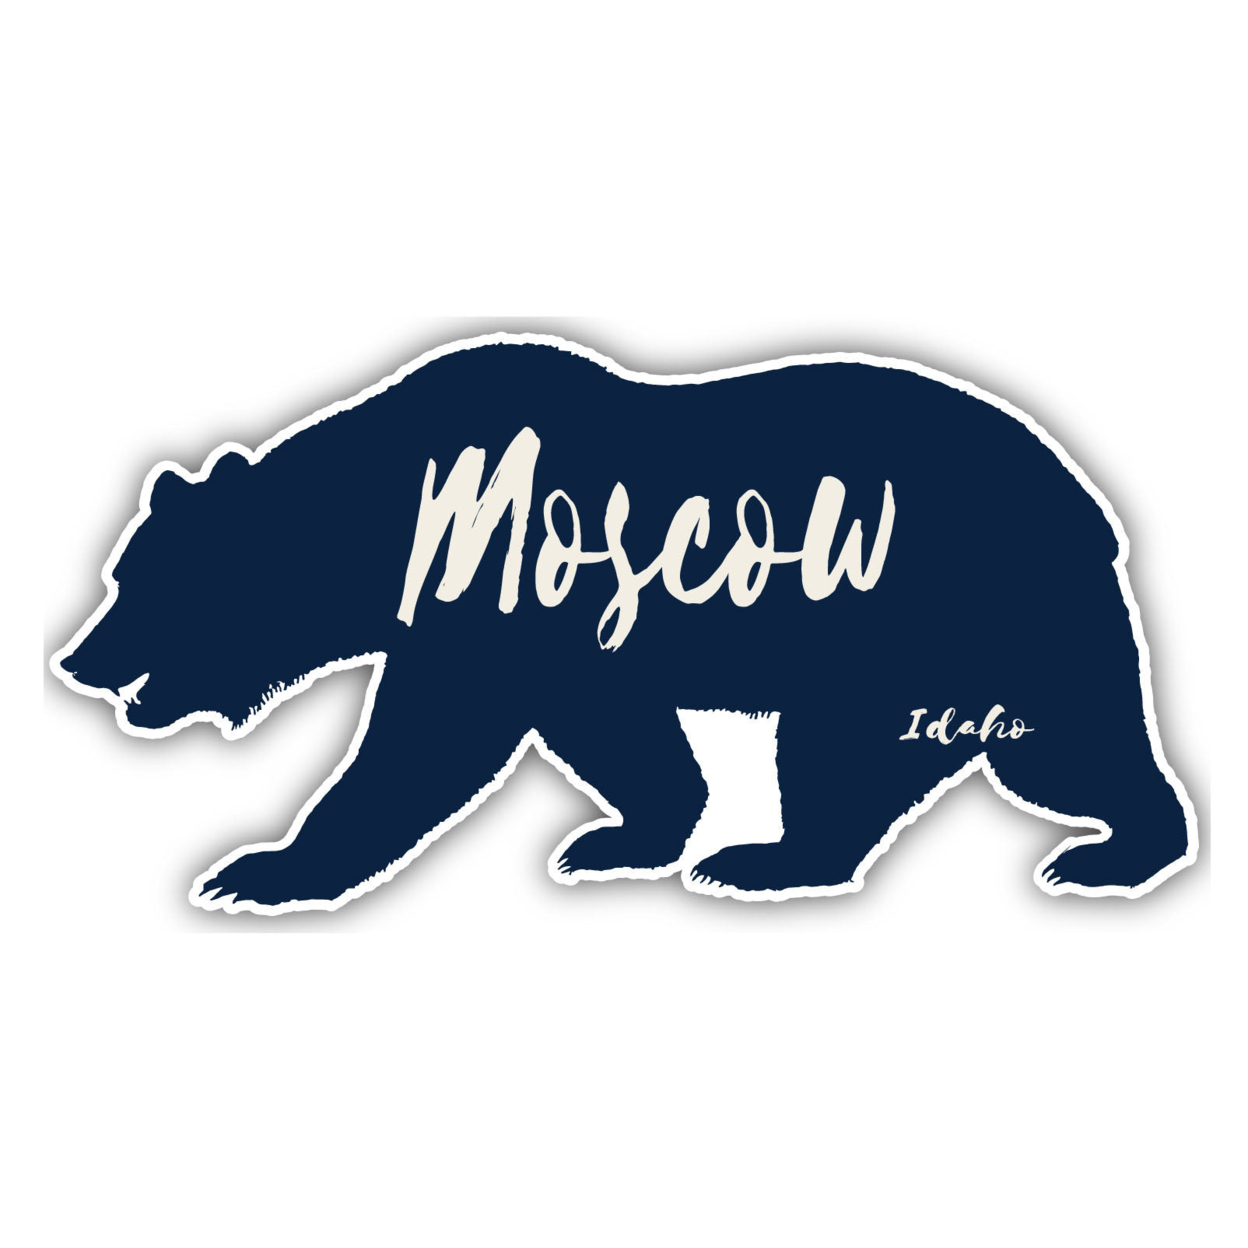 Moscow Idaho Souvenir Decorative Stickers (Choose Theme And Size) - Single Unit, 4-Inch, Bear